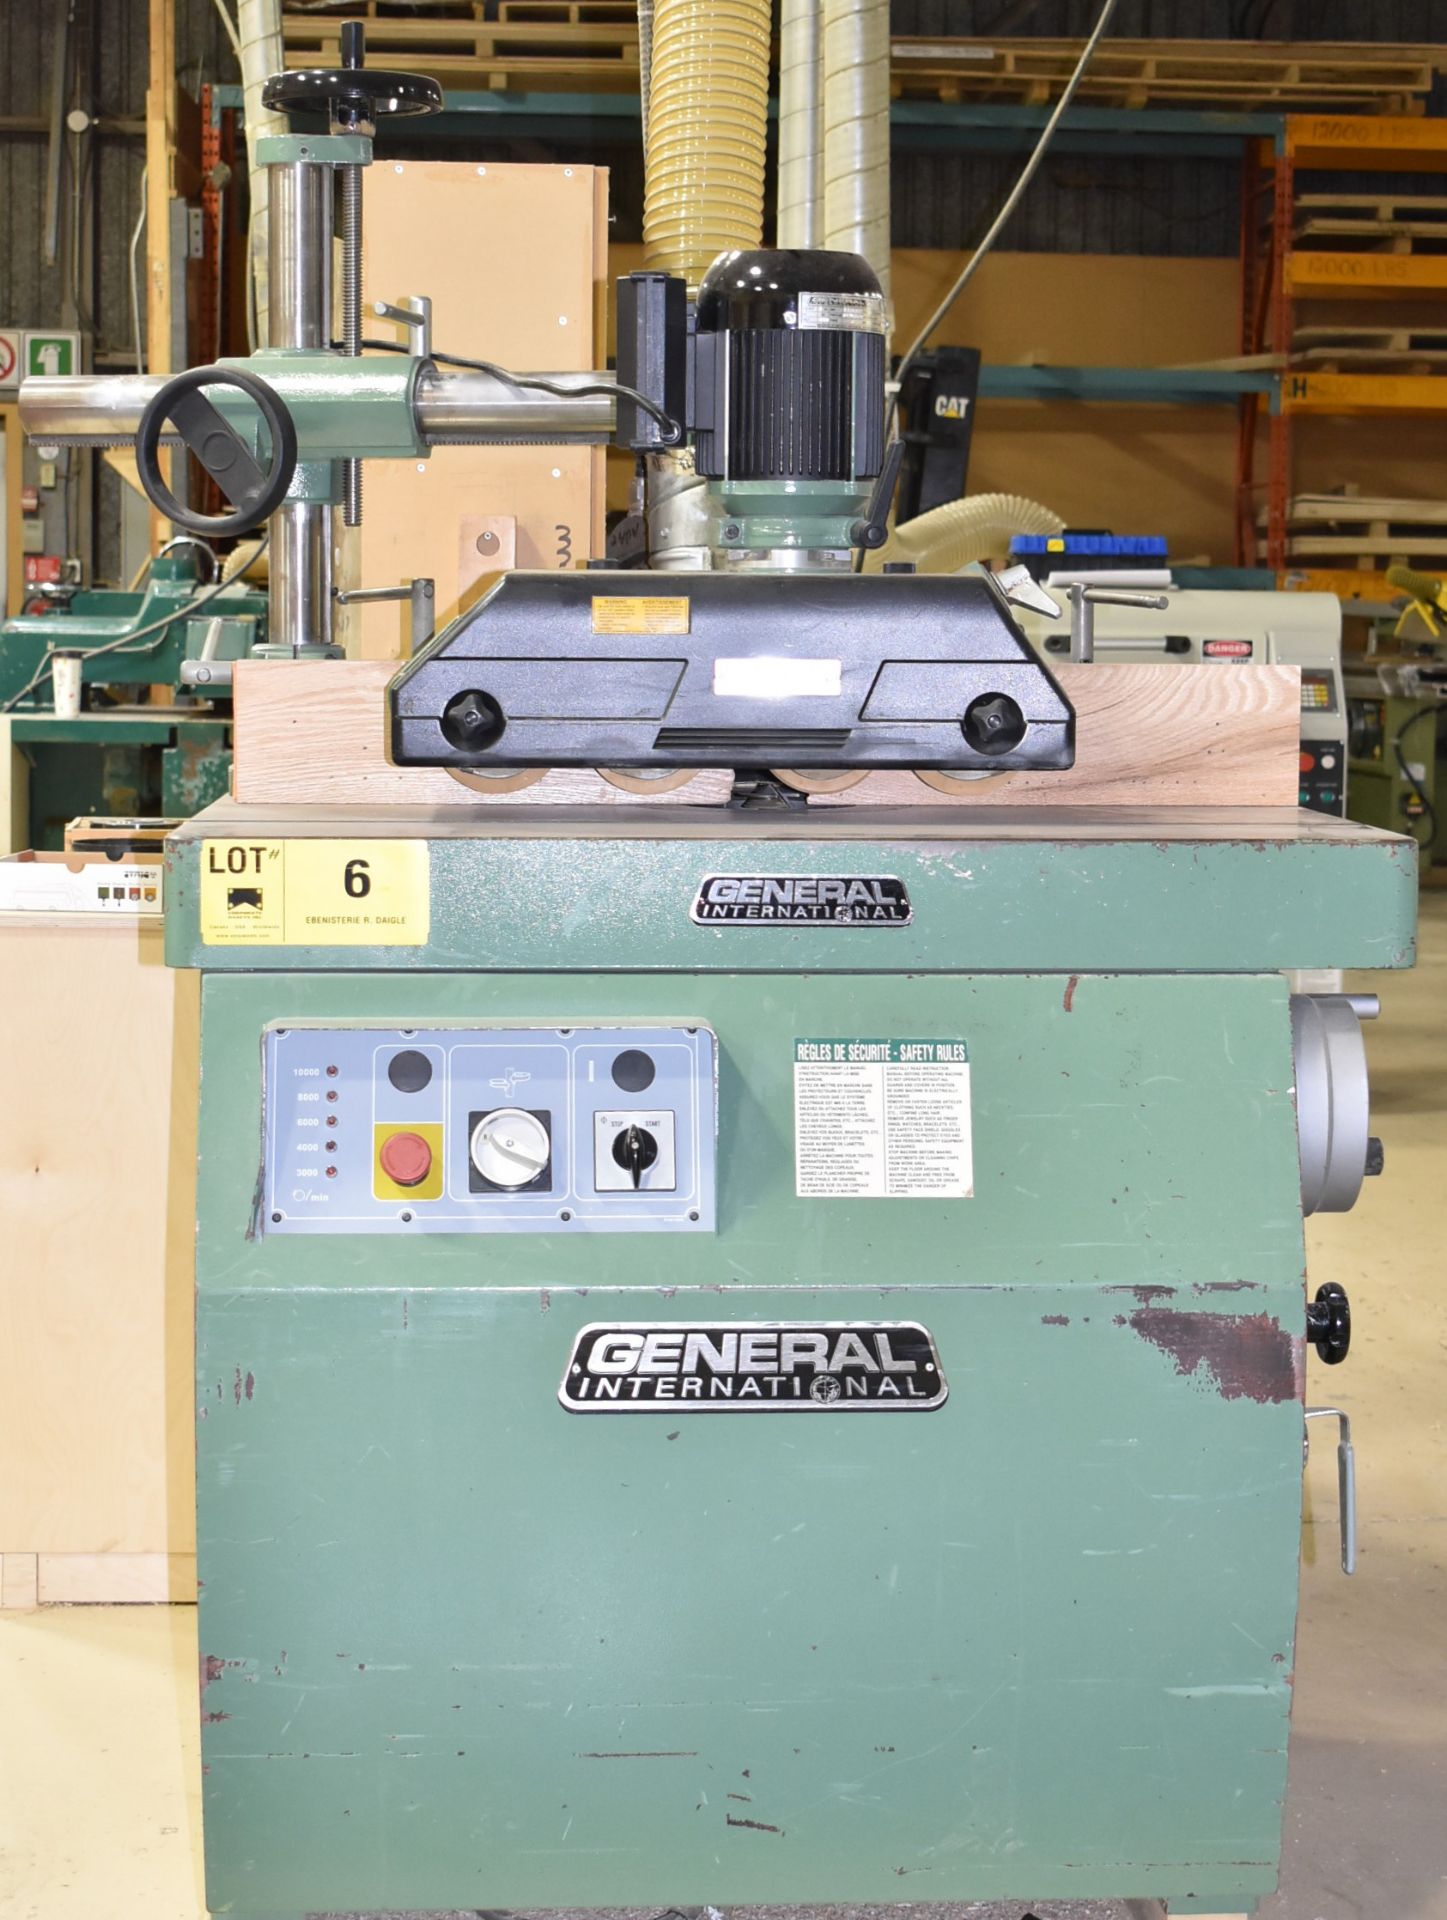 GENERAL 40-540M3 SLIDING TABLE SHAPER WITH TILTING SPINDLE, 7.5 HP MOTOR, GENERAL 20-480M3 1 HP